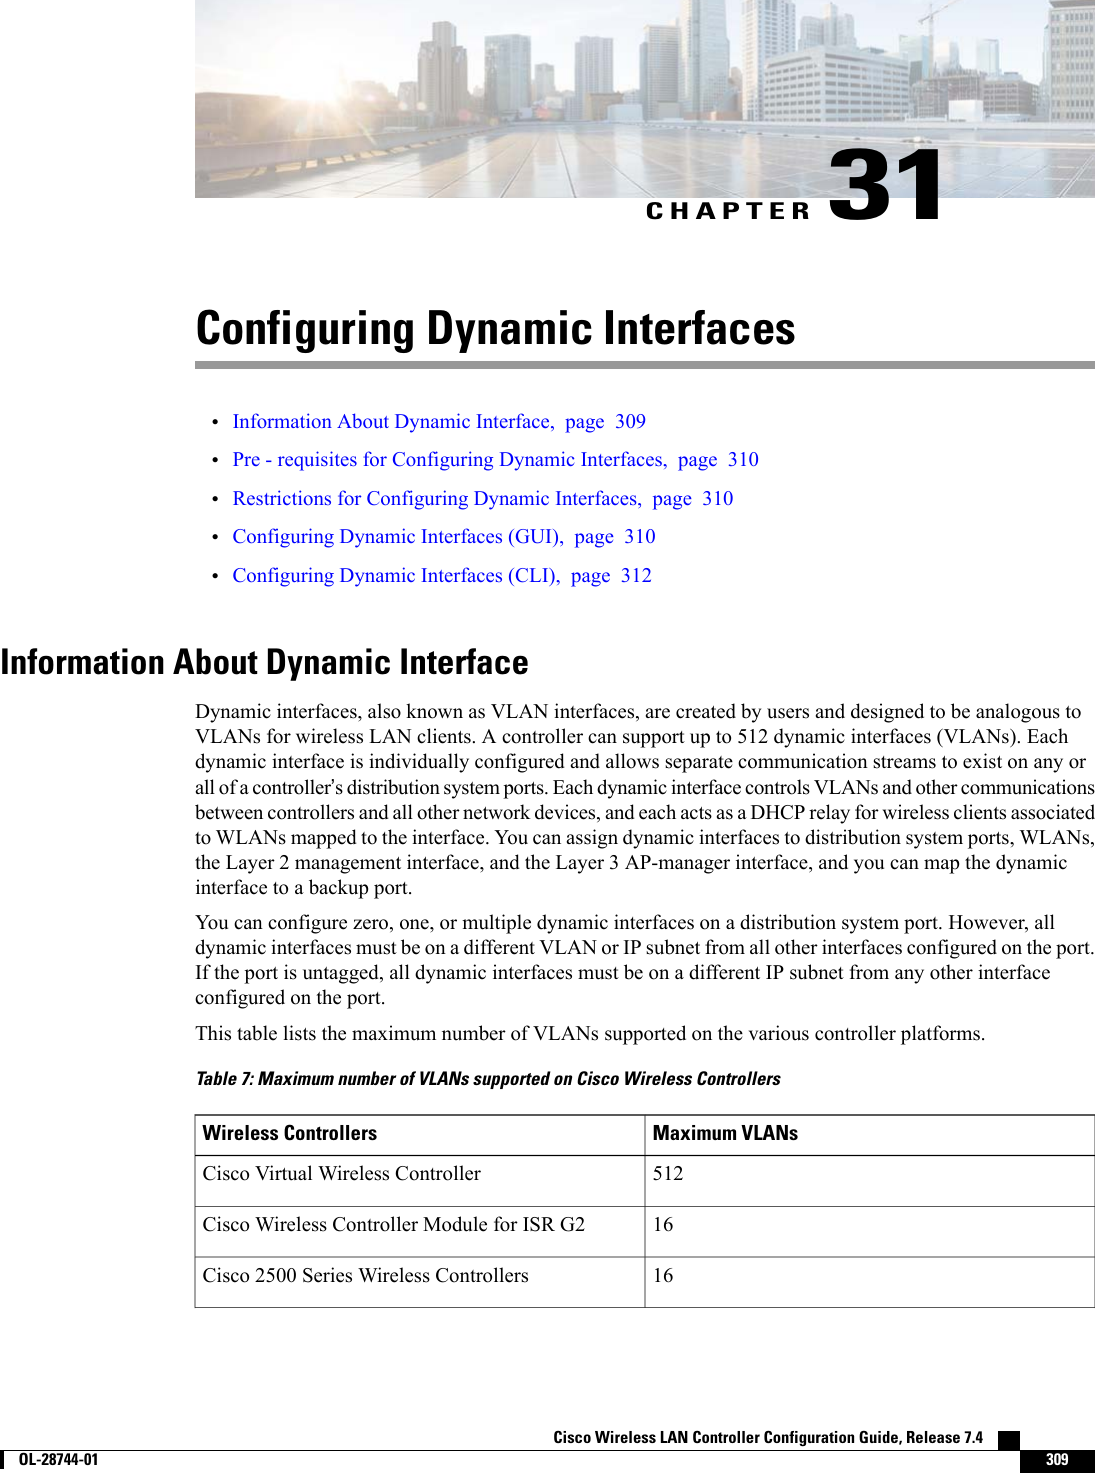 CHAPTER 31Configuring Dynamic Interfaces•Information About Dynamic Interface, page 309•Pre - requisites for Configuring Dynamic Interfaces, page 310•Restrictions for Configuring Dynamic Interfaces, page 310•Configuring Dynamic Interfaces (GUI), page 310•Configuring Dynamic Interfaces (CLI), page 312Information About Dynamic InterfaceDynamic interfaces, also known as VLAN interfaces, are created by users and designed to be analogous toVLANs for wireless LAN clients. A controller can support up to 512 dynamic interfaces (VLANs). Eachdynamic interface is individually configured and allows separate communication streams to exist on any orall of a controller’s distribution system ports. Each dynamic interface controls VLANs and other communicationsbetween controllers and all other network devices, and each acts as a DHCP relay for wireless clients associatedto WLANs mapped to the interface. You can assign dynamic interfaces to distribution system ports, WLANs,the Layer 2 management interface, and the Layer 3 AP-manager interface, and you can map the dynamicinterface to a backup port.You can configure zero, one, or multiple dynamic interfaces on a distribution system port. However, alldynamic interfaces must be on a different VLAN or IP subnet from all other interfaces configured on the port.If the port is untagged, all dynamic interfaces must be on a different IP subnet from any other interfaceconfigured on the port.This table lists the maximum number of VLANs supported on the various controller platforms.Table 7: Maximum number of VLANs supported on Cisco Wireless ControllersMaximum VLANsWireless Controllers512Cisco Virtual Wireless Controller16Cisco Wireless Controller Module for ISR G216Cisco 2500 Series Wireless ControllersCisco Wireless LAN Controller Configuration Guide, Release 7.4        OL-28744-01 309